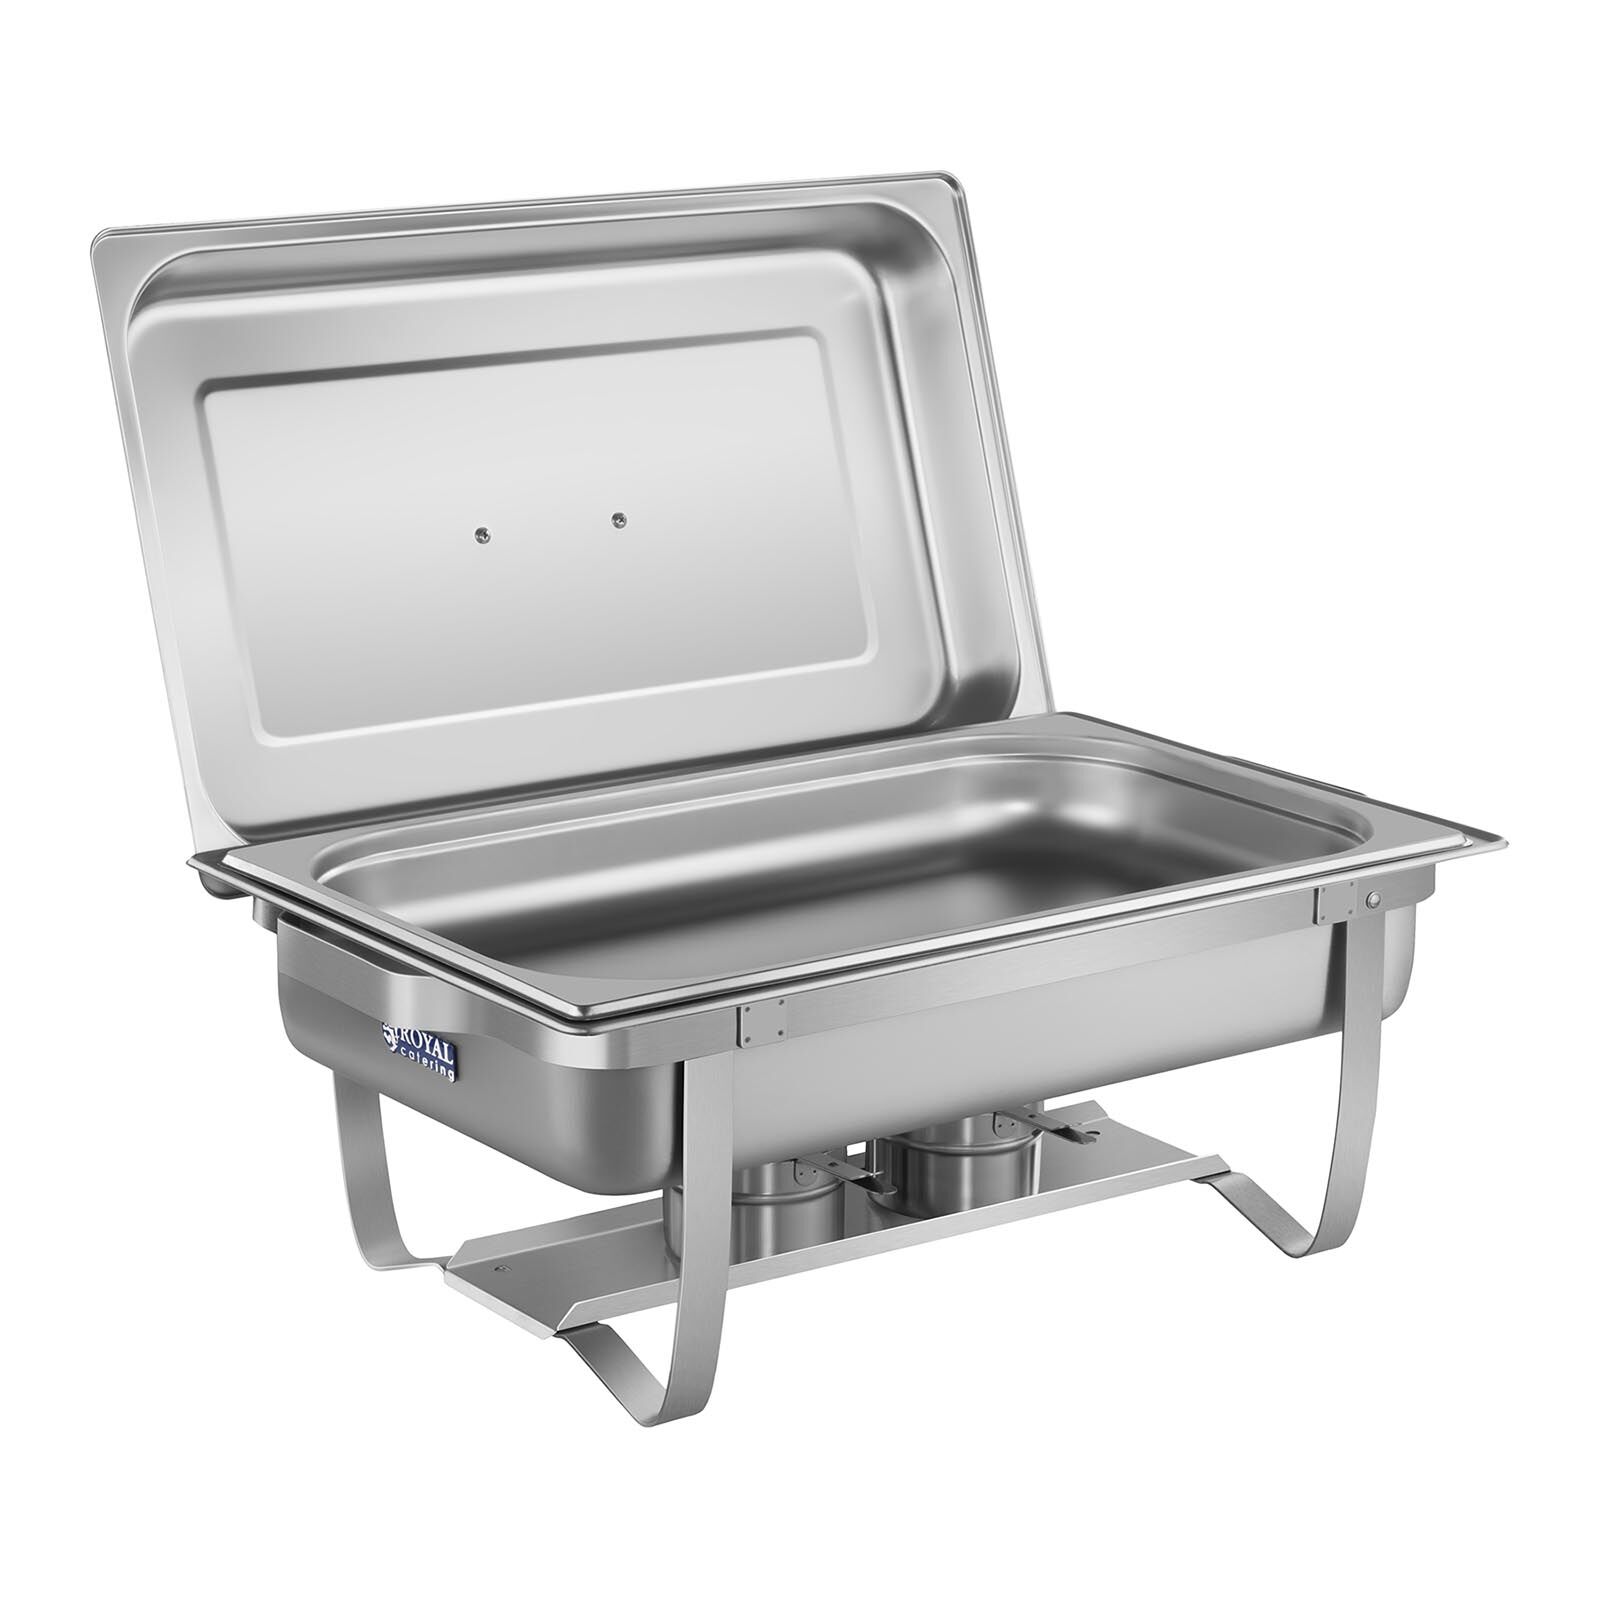 Royal Catering Chafing dish - 53 cm - GN 1/1 10010878